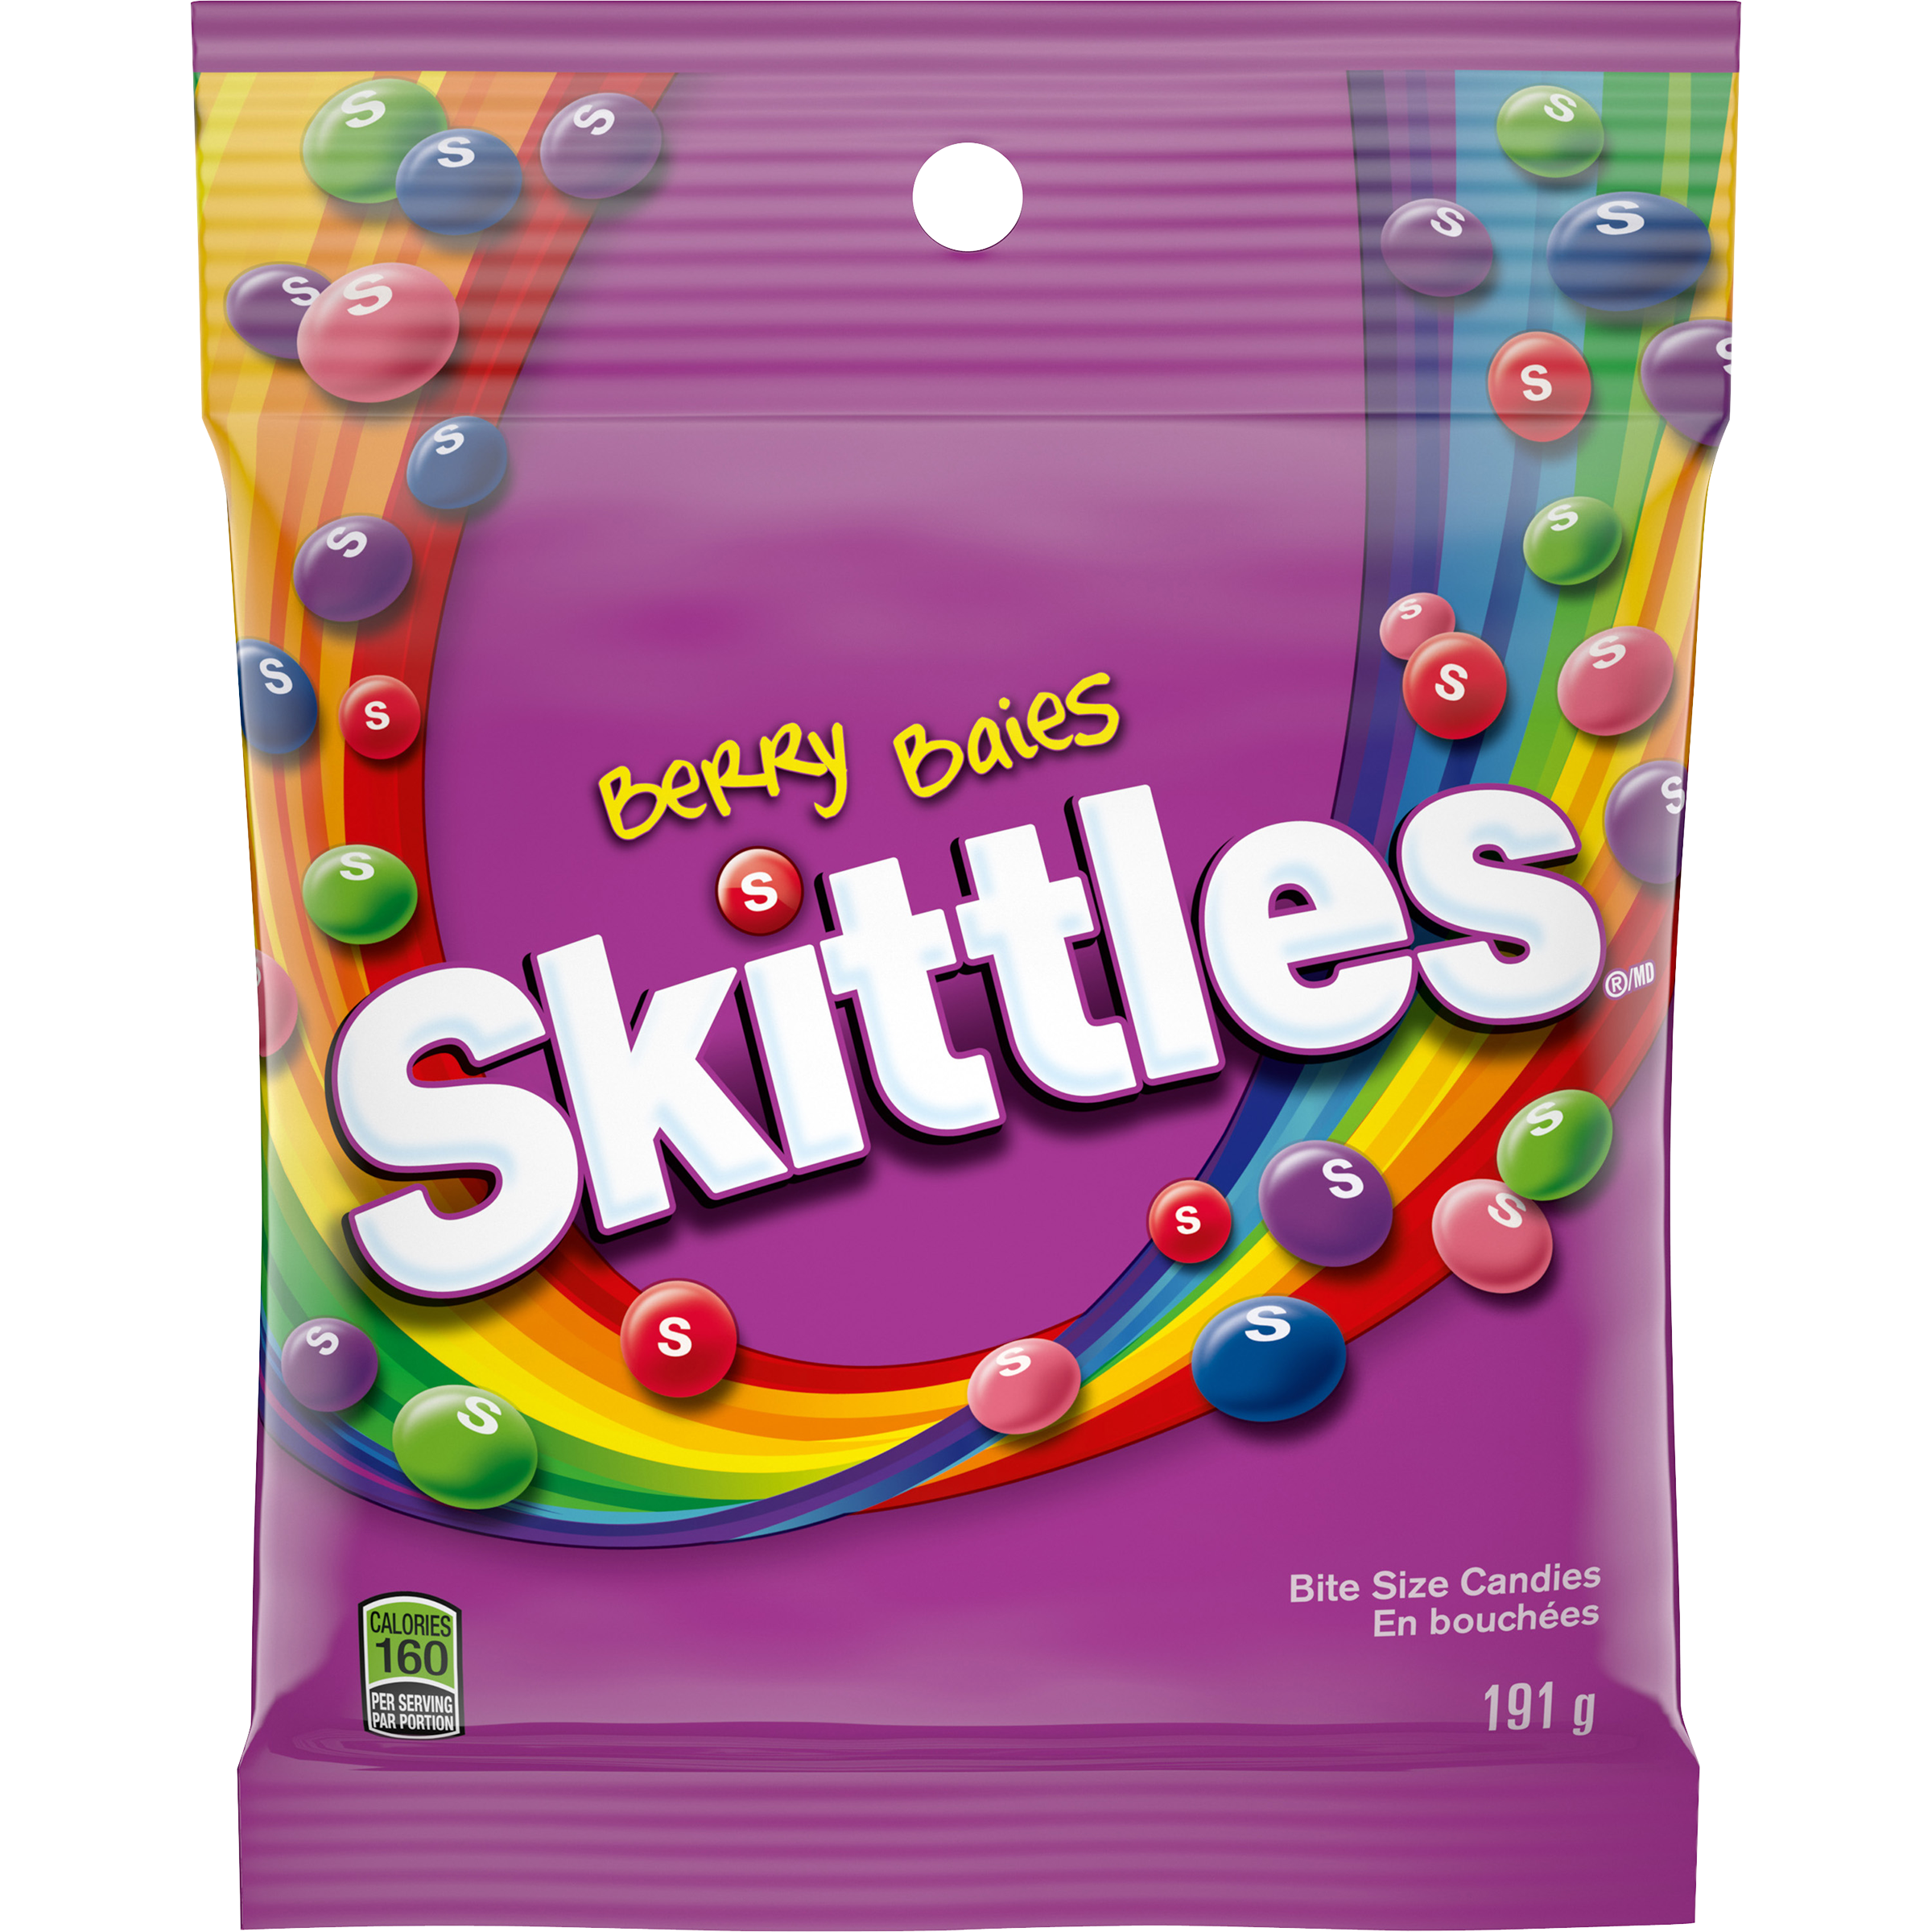 SKITTLES Berry Candy Bag, 191g